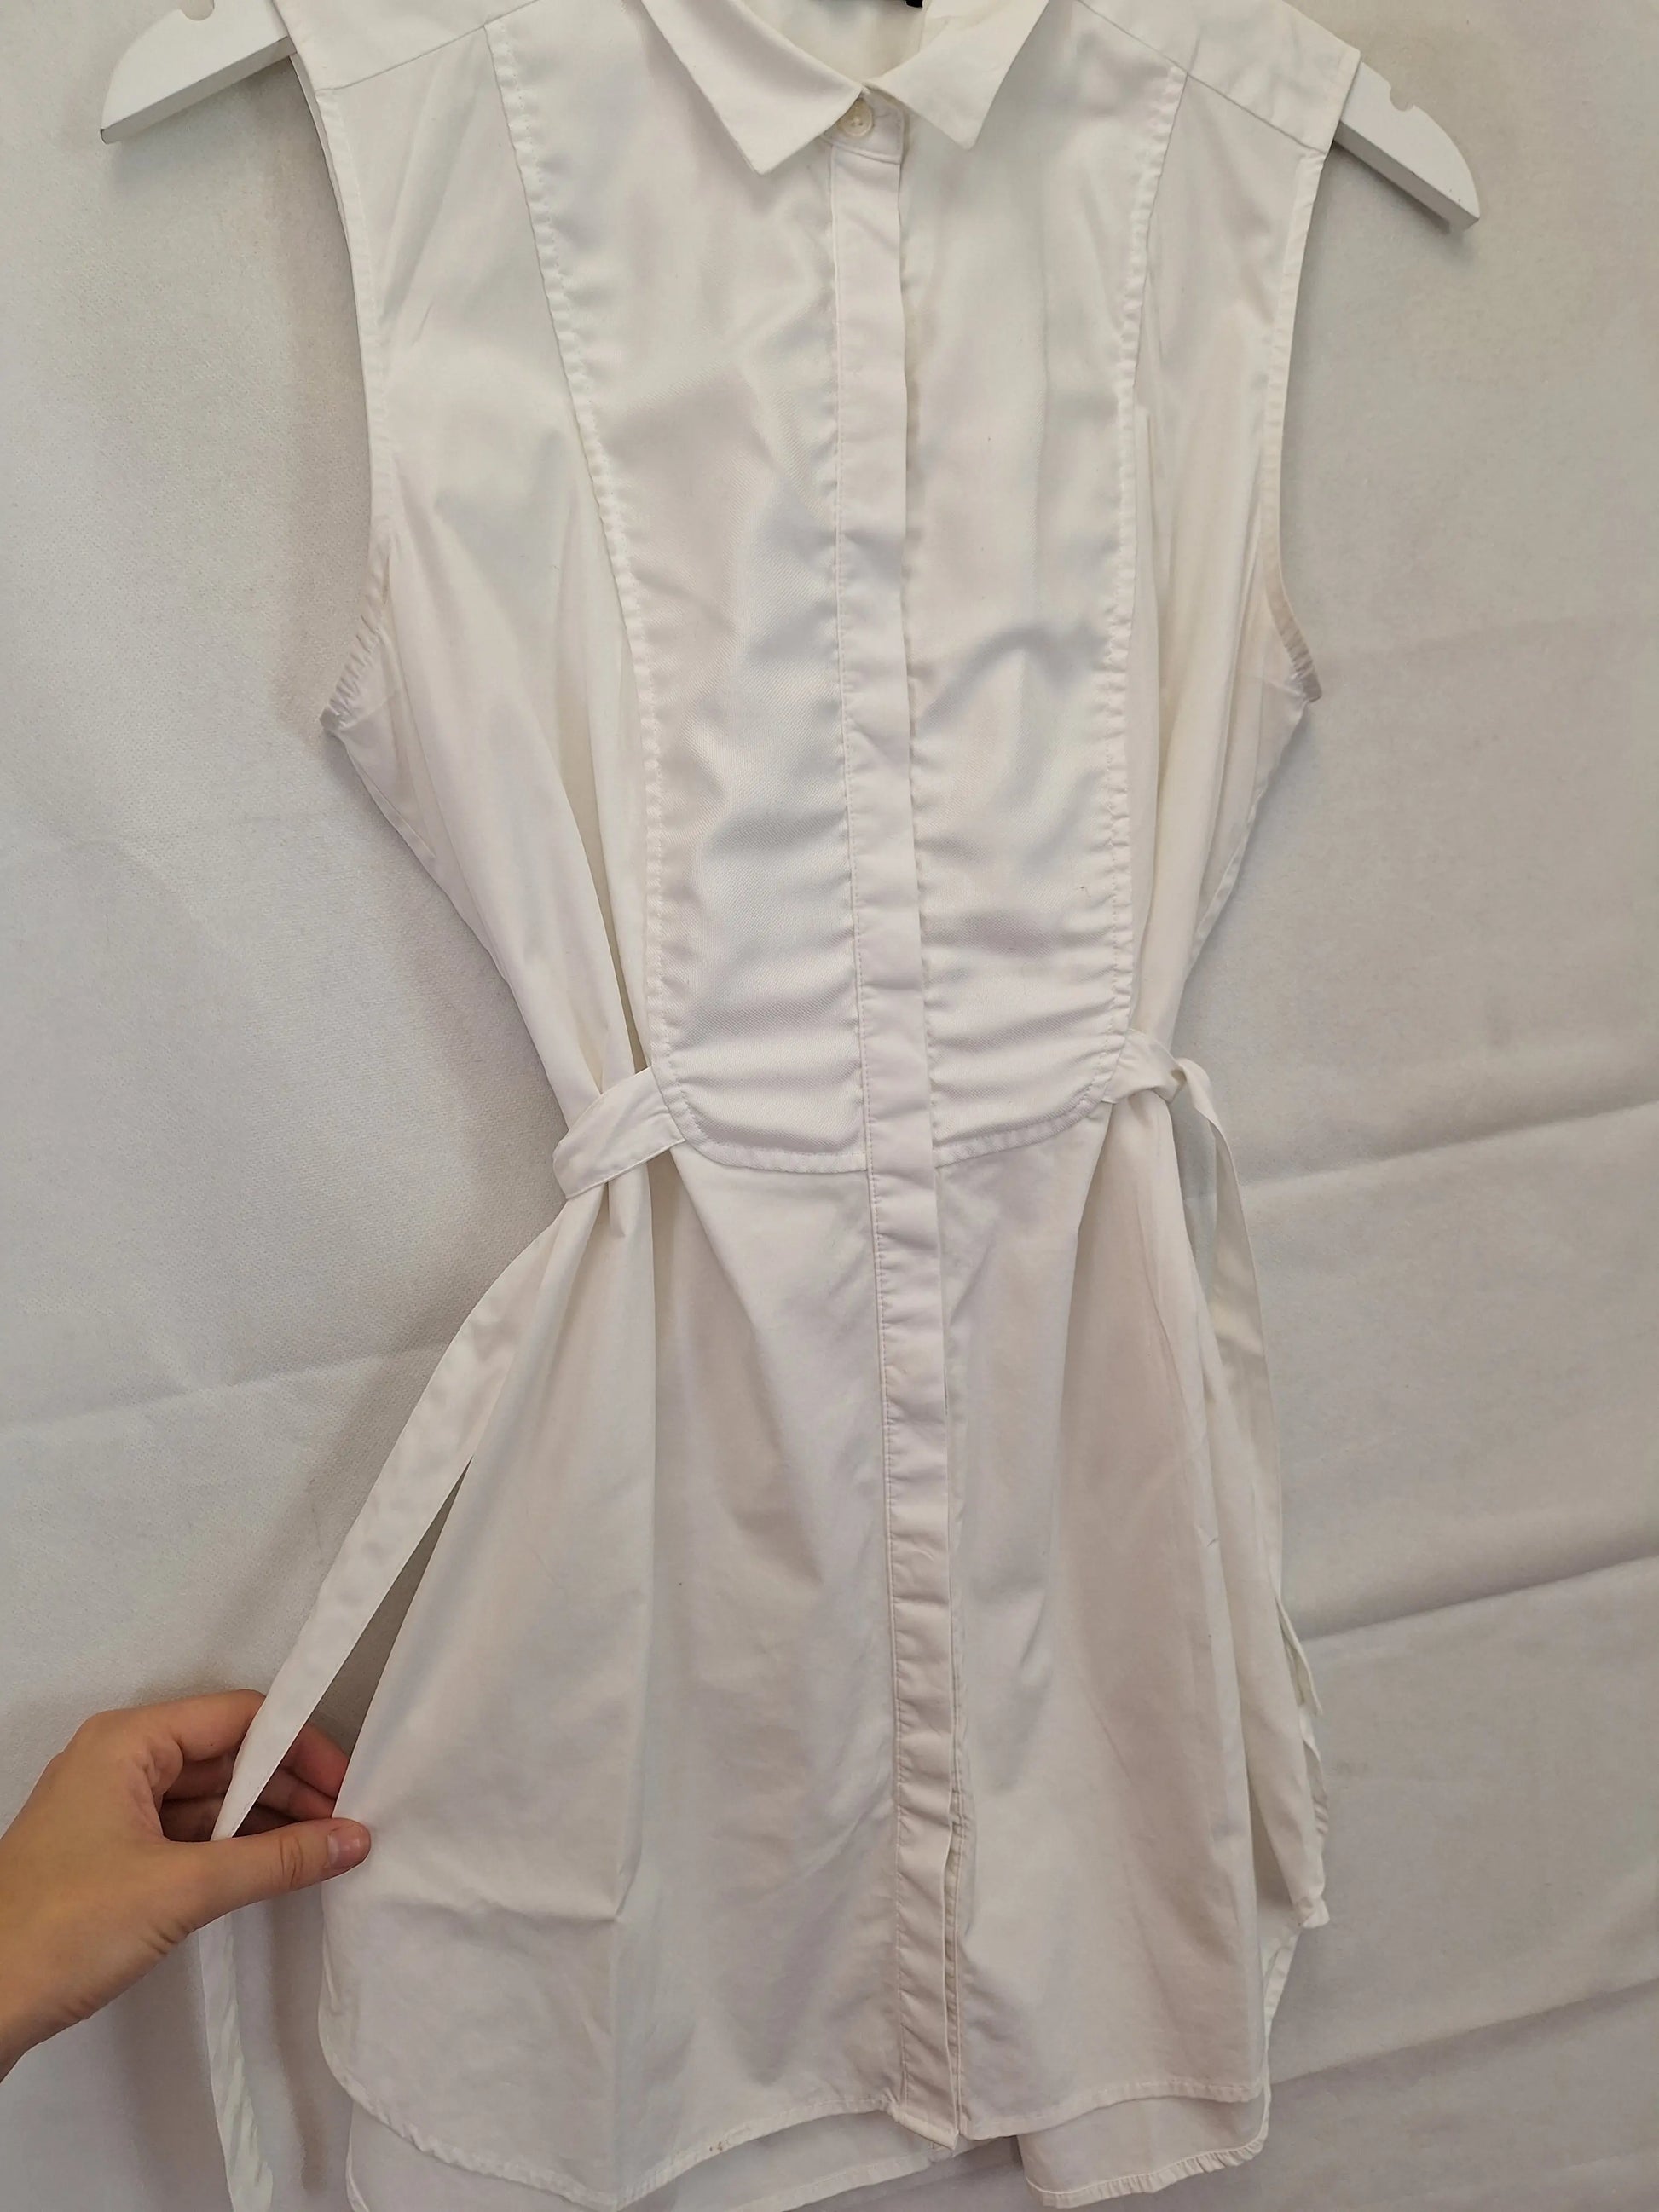 Saba Crisp White Sleeveless Scoop Shirt Size 12 by SwapUp-Online Second Hand Store-Online Thrift Store